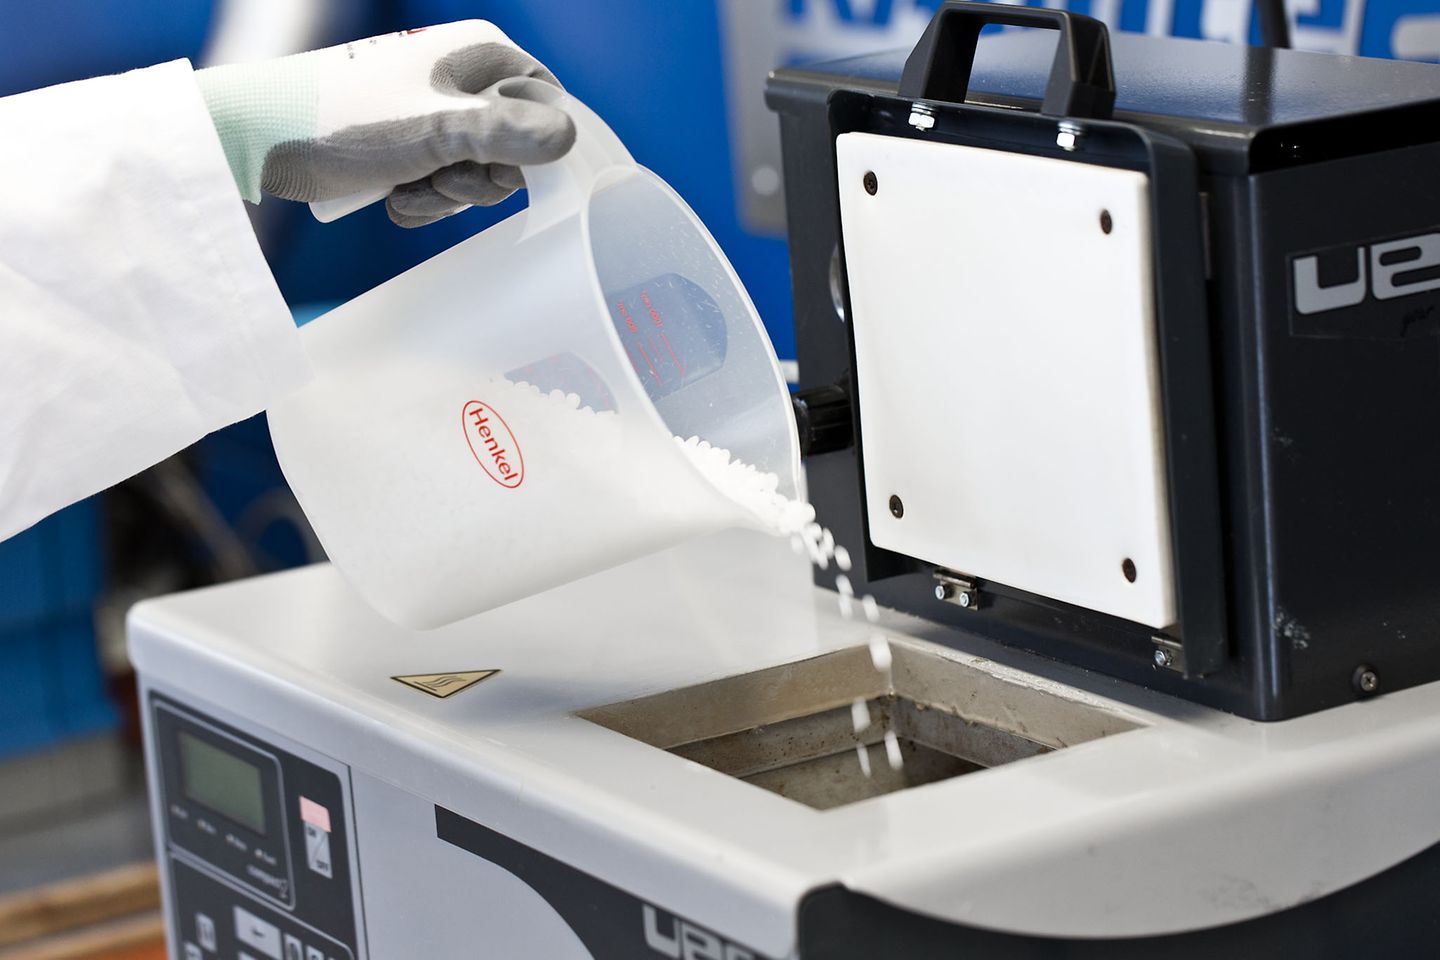 The Technomelt Supra Pro range is optimized for a variety of applications in end-of-line packaging, including sealing boxes and cartons, raising the bar for food safety and efficiency in production.